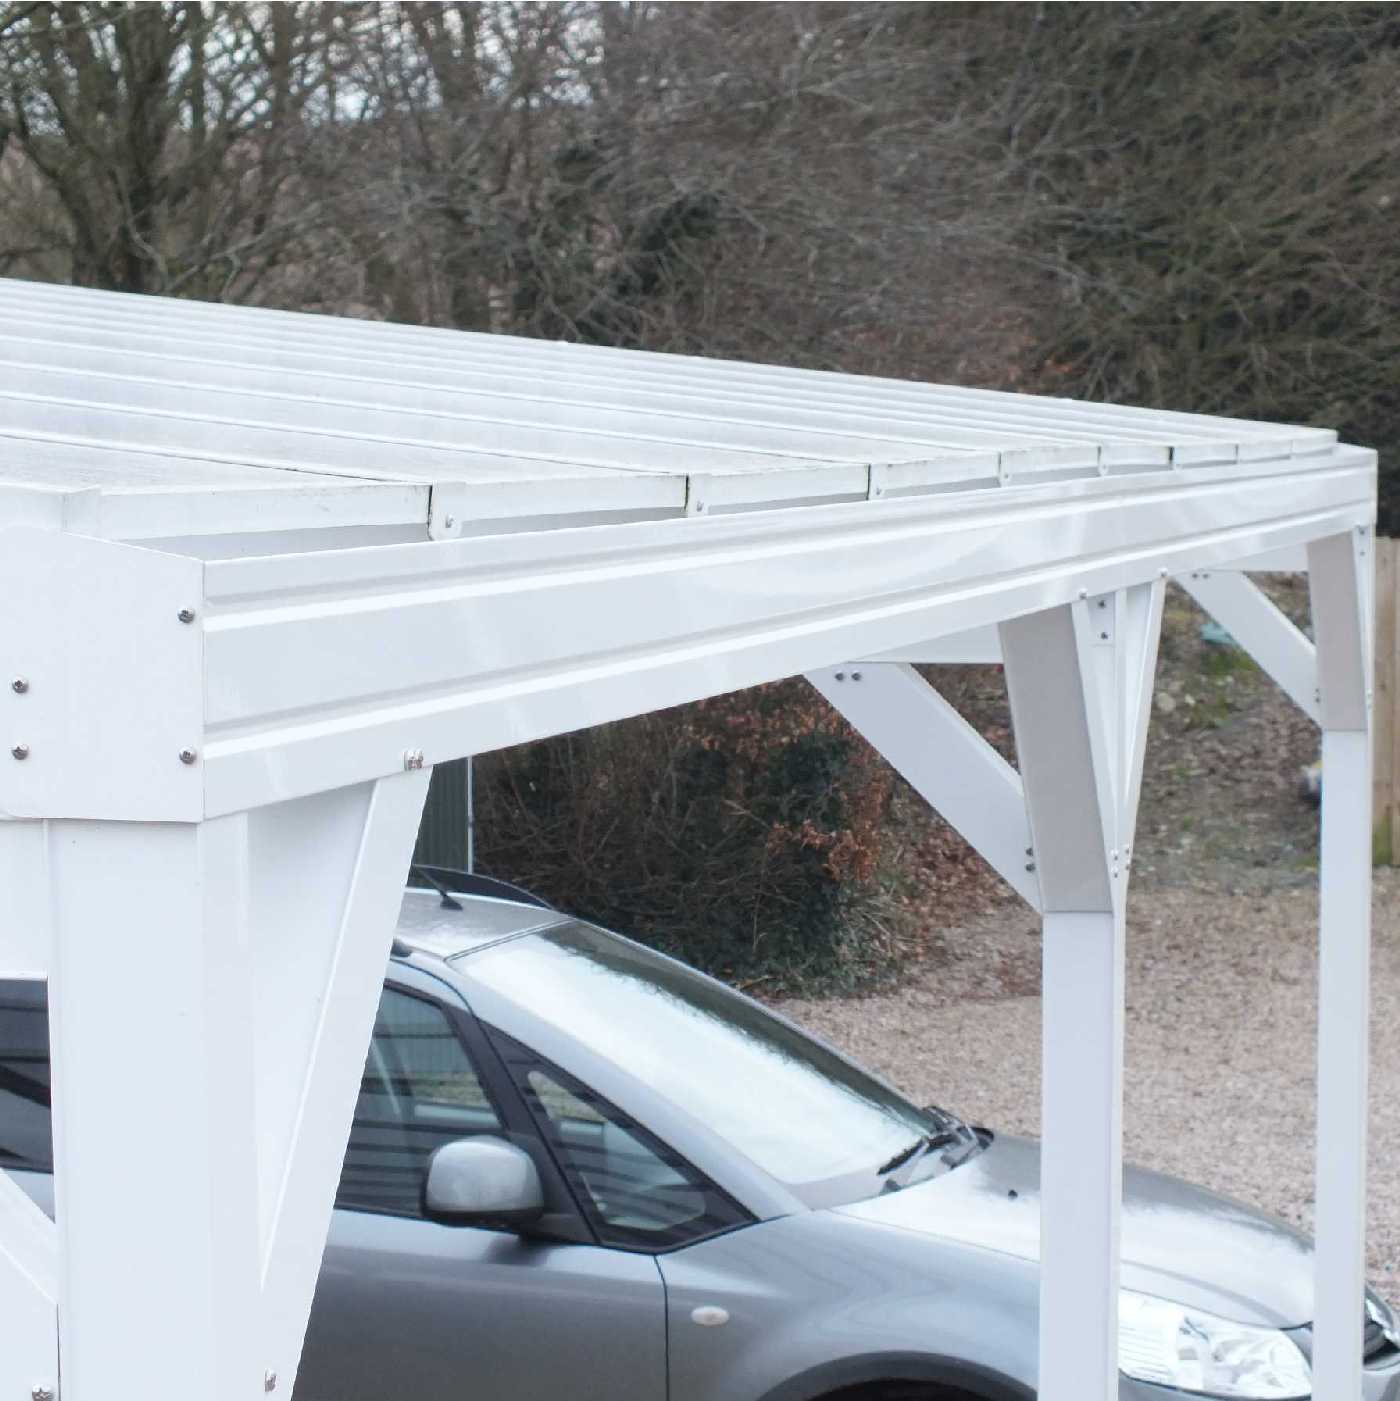 Omega Smart Free-Standing, White MonoPitch Roof Canopy with 16mm Polycarbonate Glazing - 7.0m (W) x 4.0m (P), (8) Supporting Posts from Omega Build